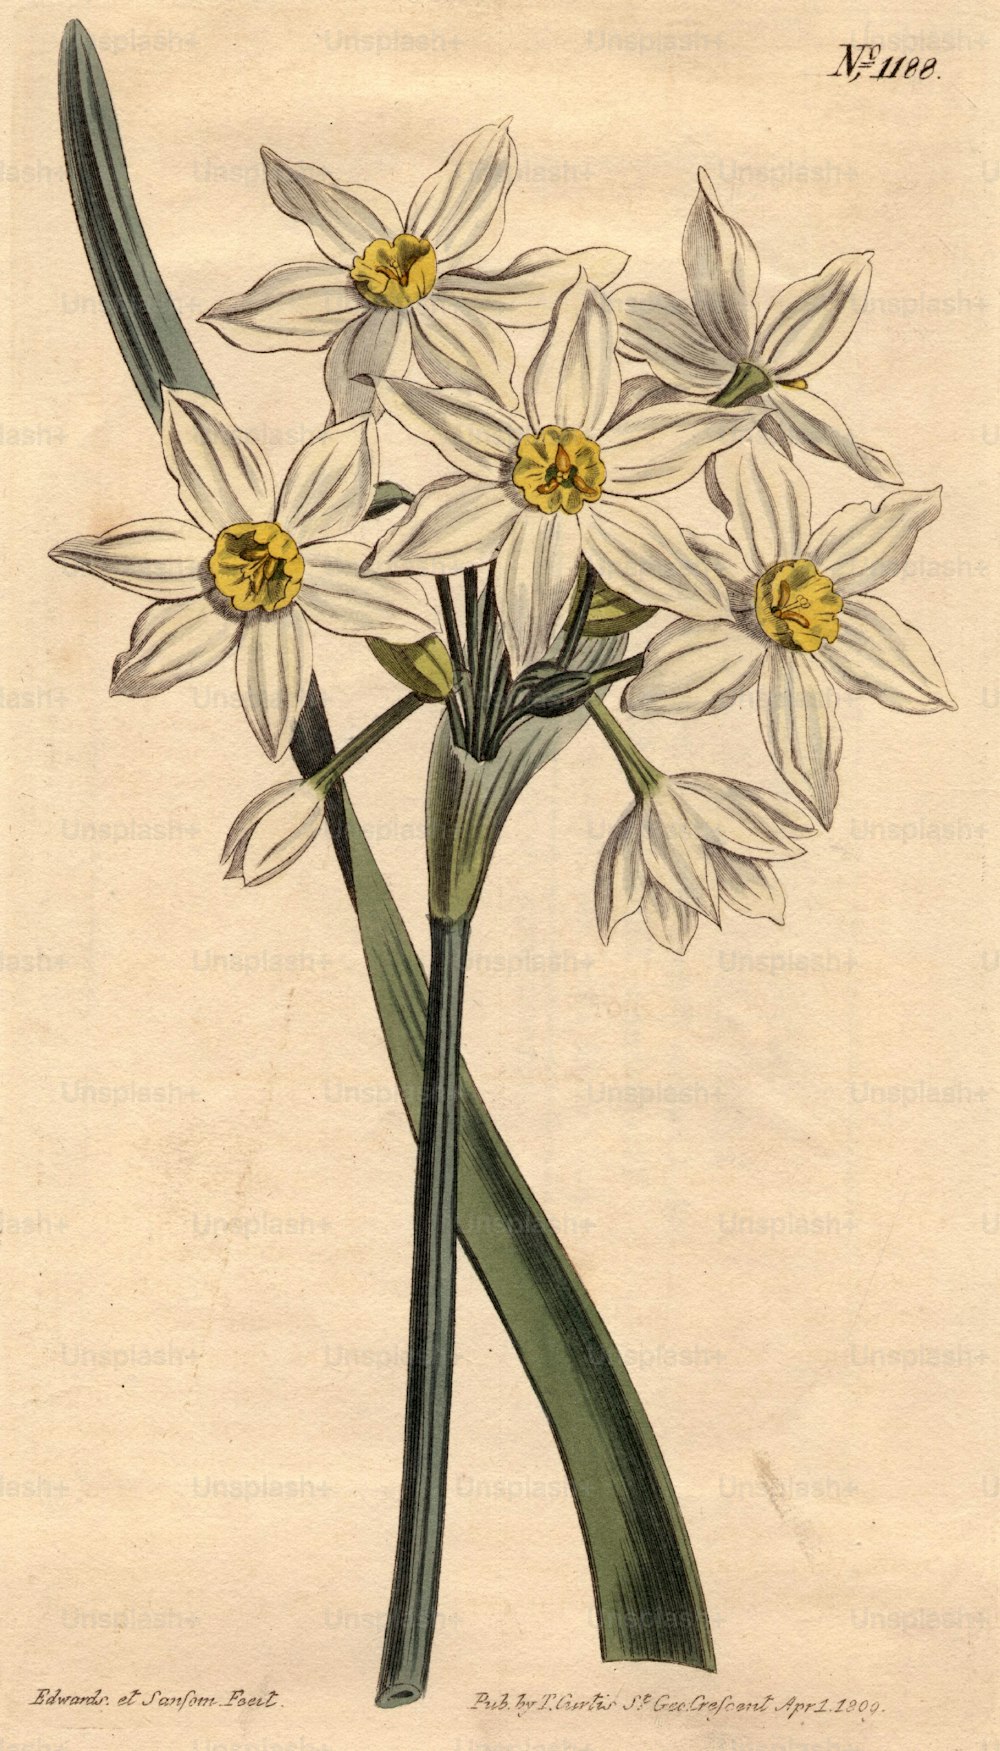 circa 1800:  White narcissus.  Curtis' Botanical Magazine - pub. 1800  (Photo by Edward Gooch Collection/Getty Images)